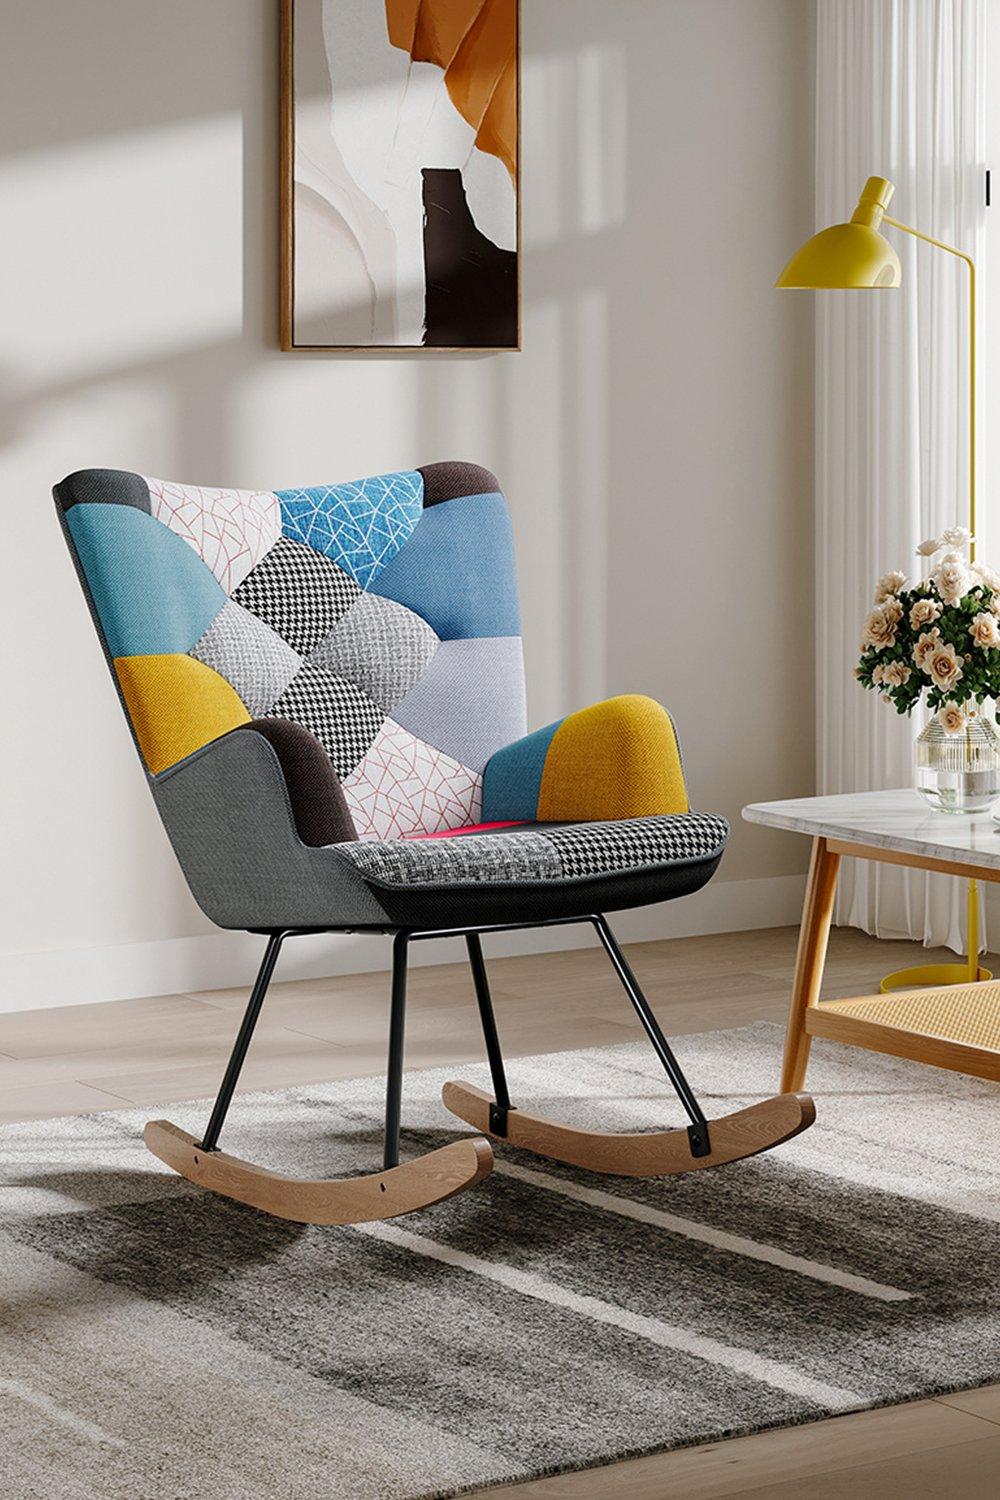 Terry Cloth Colourful Multi-pattern Patchwork Rocking Chair